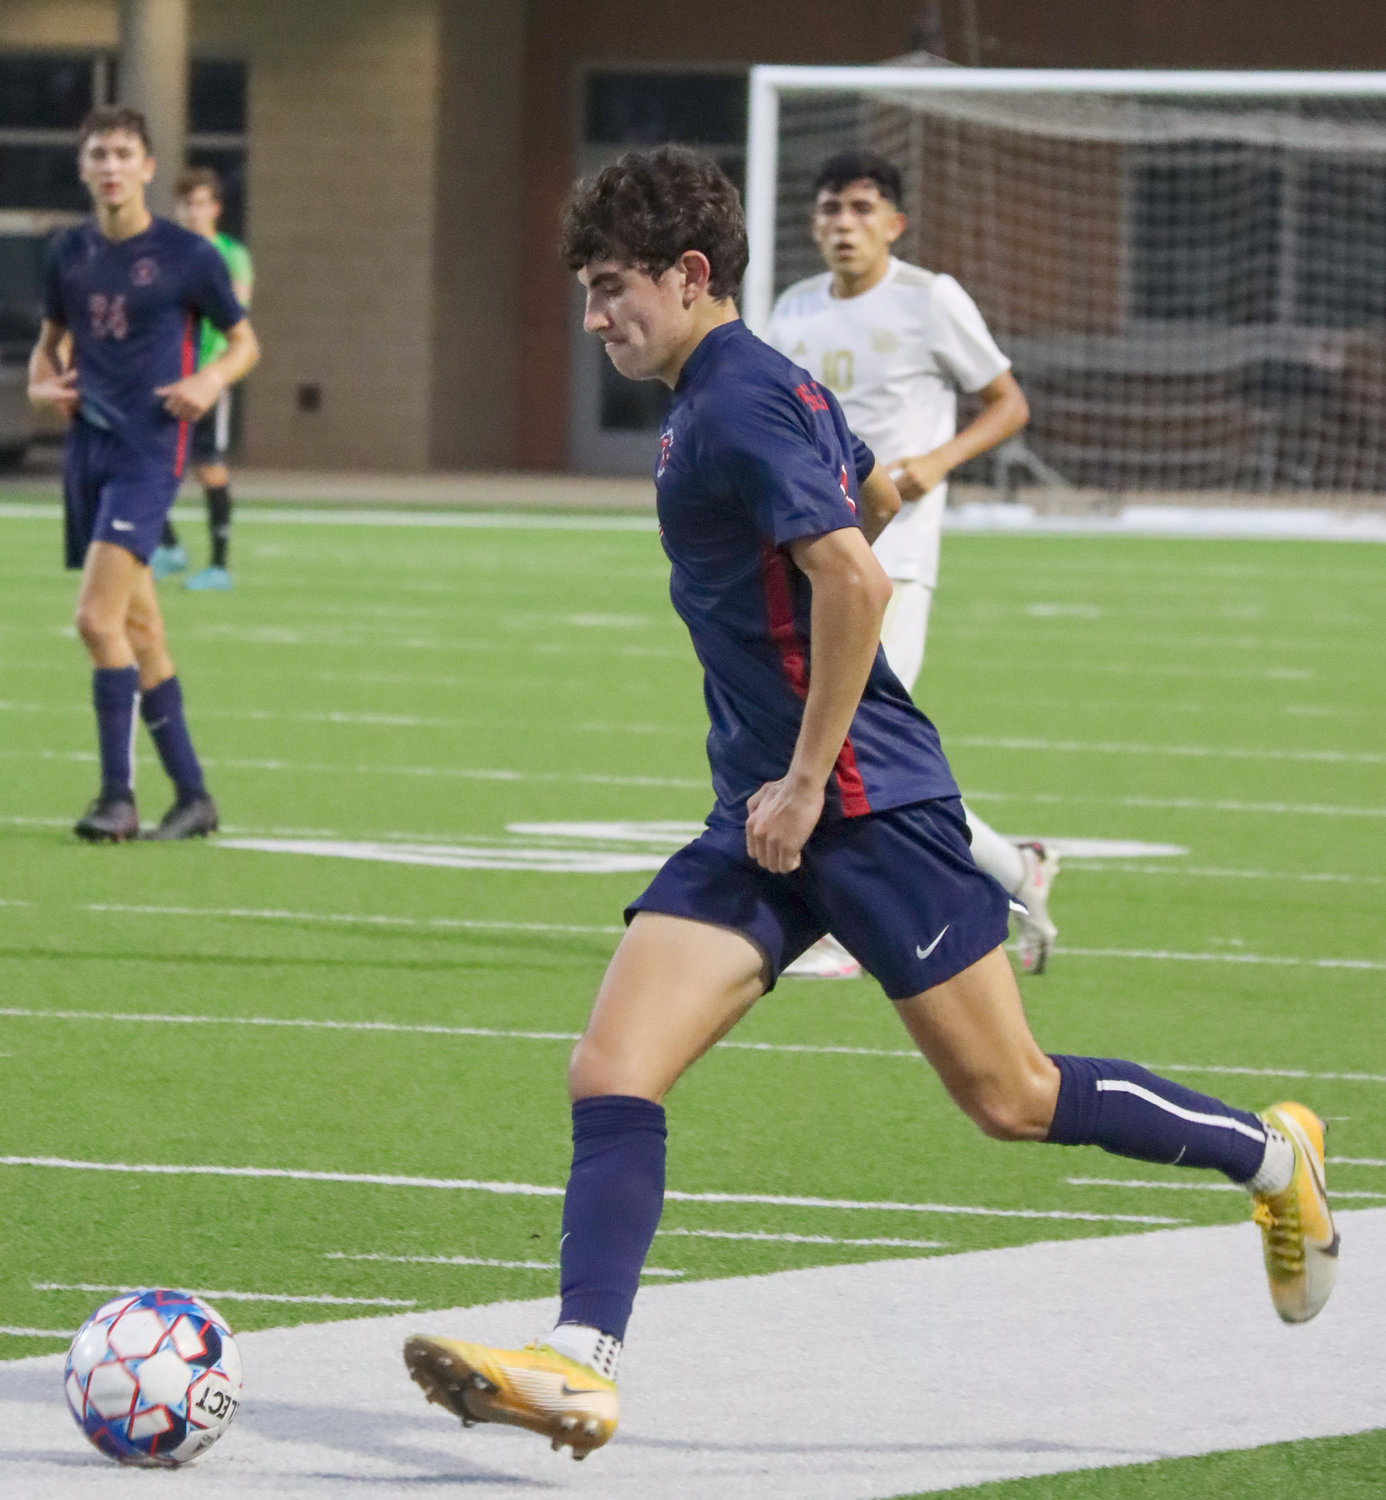 Tompkins sophomore Diego Castellano prepares to strike the ball during Tompkins’ Class 6A Region III final against Jersey Village on Friday, April 9, at Legacy Stadium.